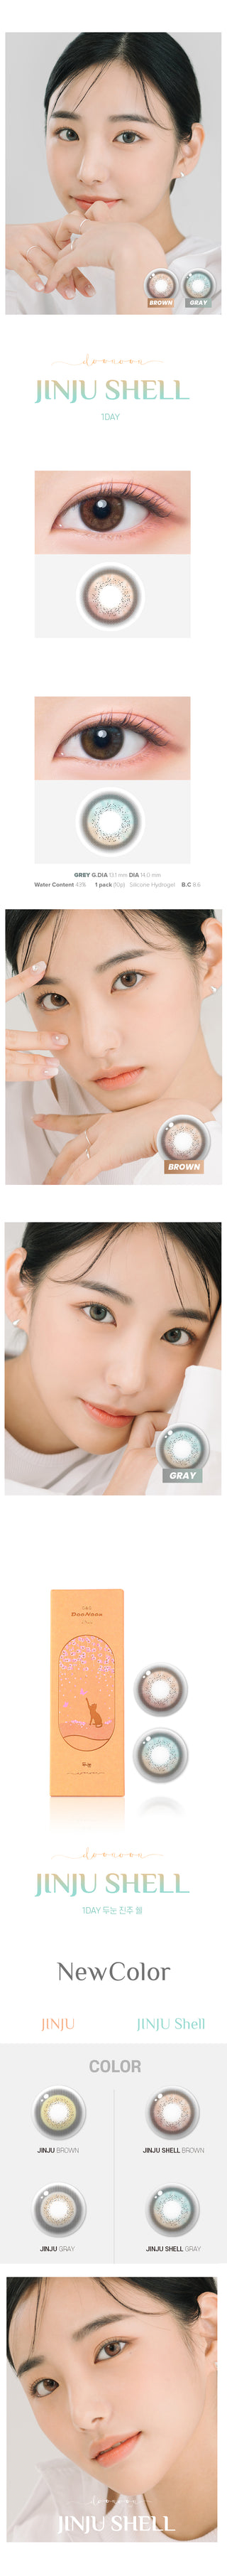 Variety of DooNoon Jinju Shell 1-Day Brown (10pk) contact lens colors displayed, with closeups of an eye wearing the contact lens colors, and with a model wearing the contact lens colors showing realistic eye-enlarging effect from various angles.